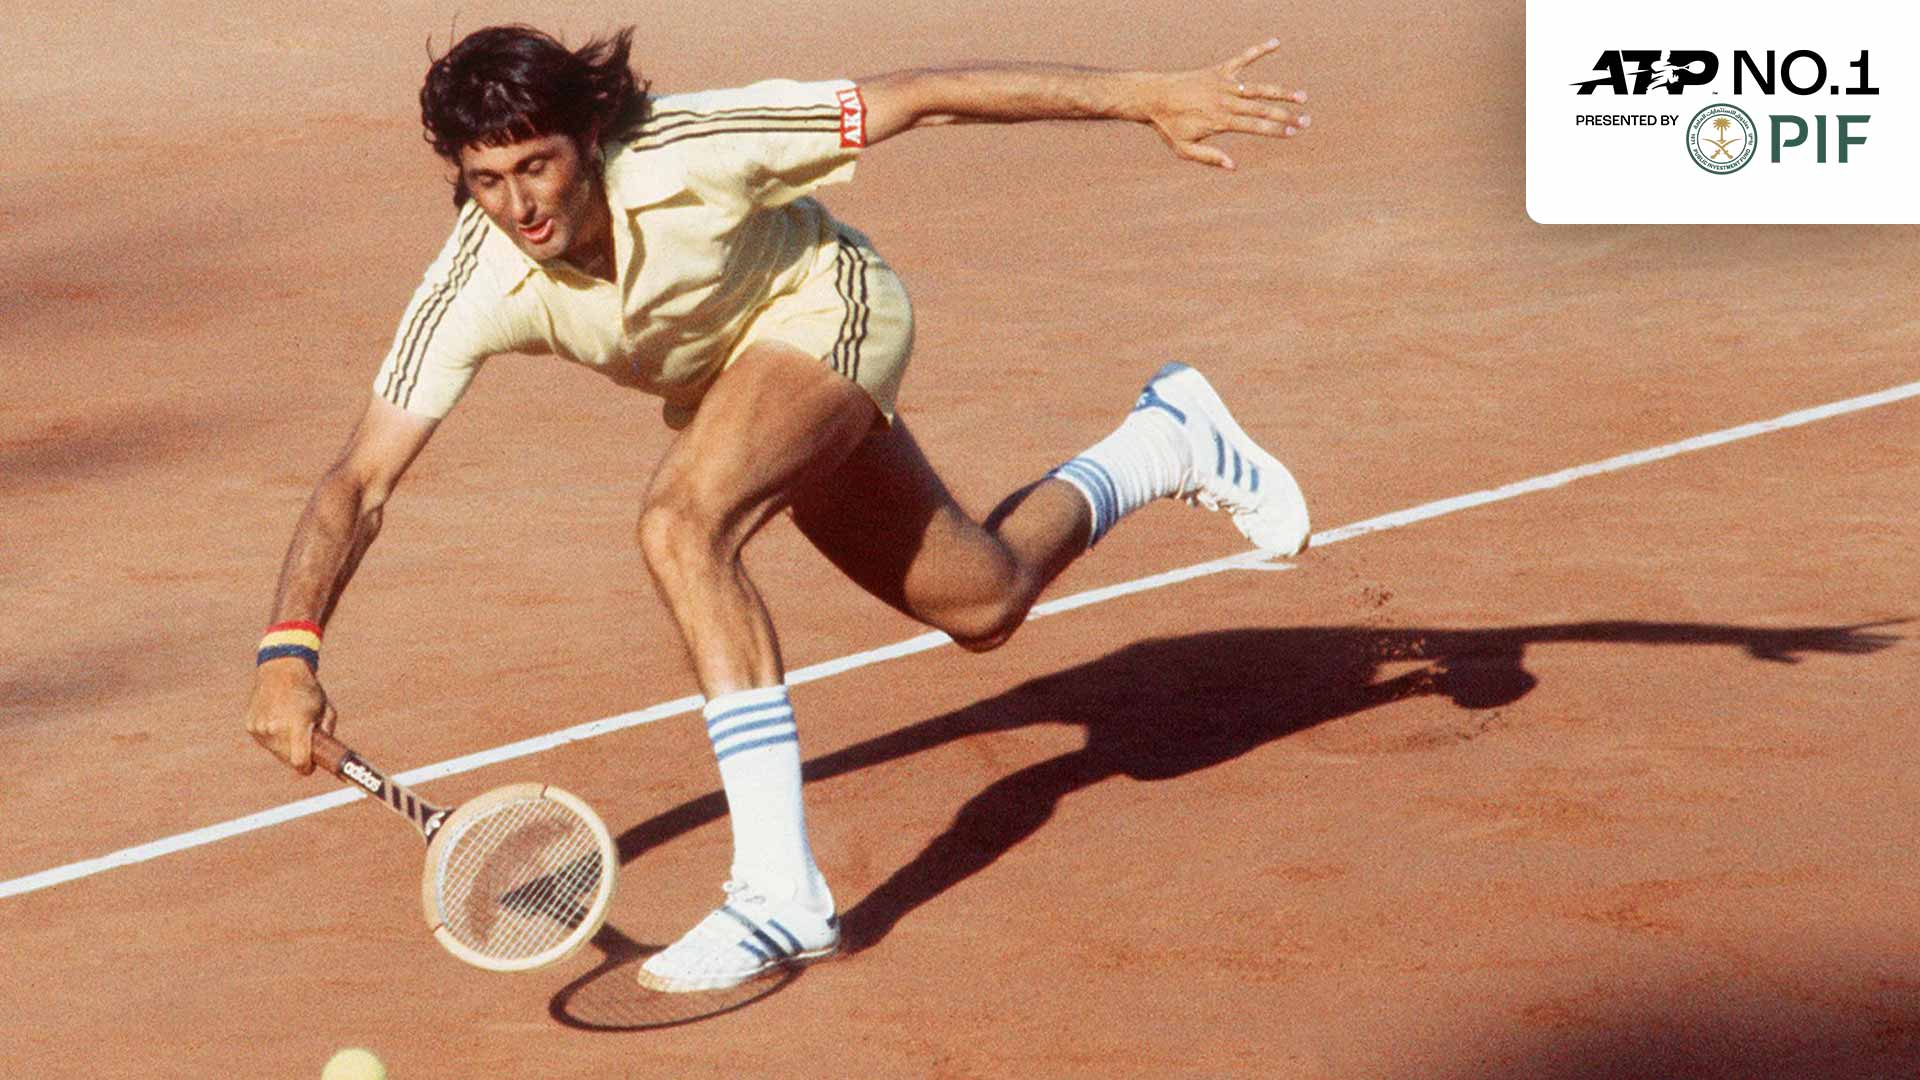 Ilie Nastase became the first No. 1 in the PIF ATP Rankings on 23 August 1973.